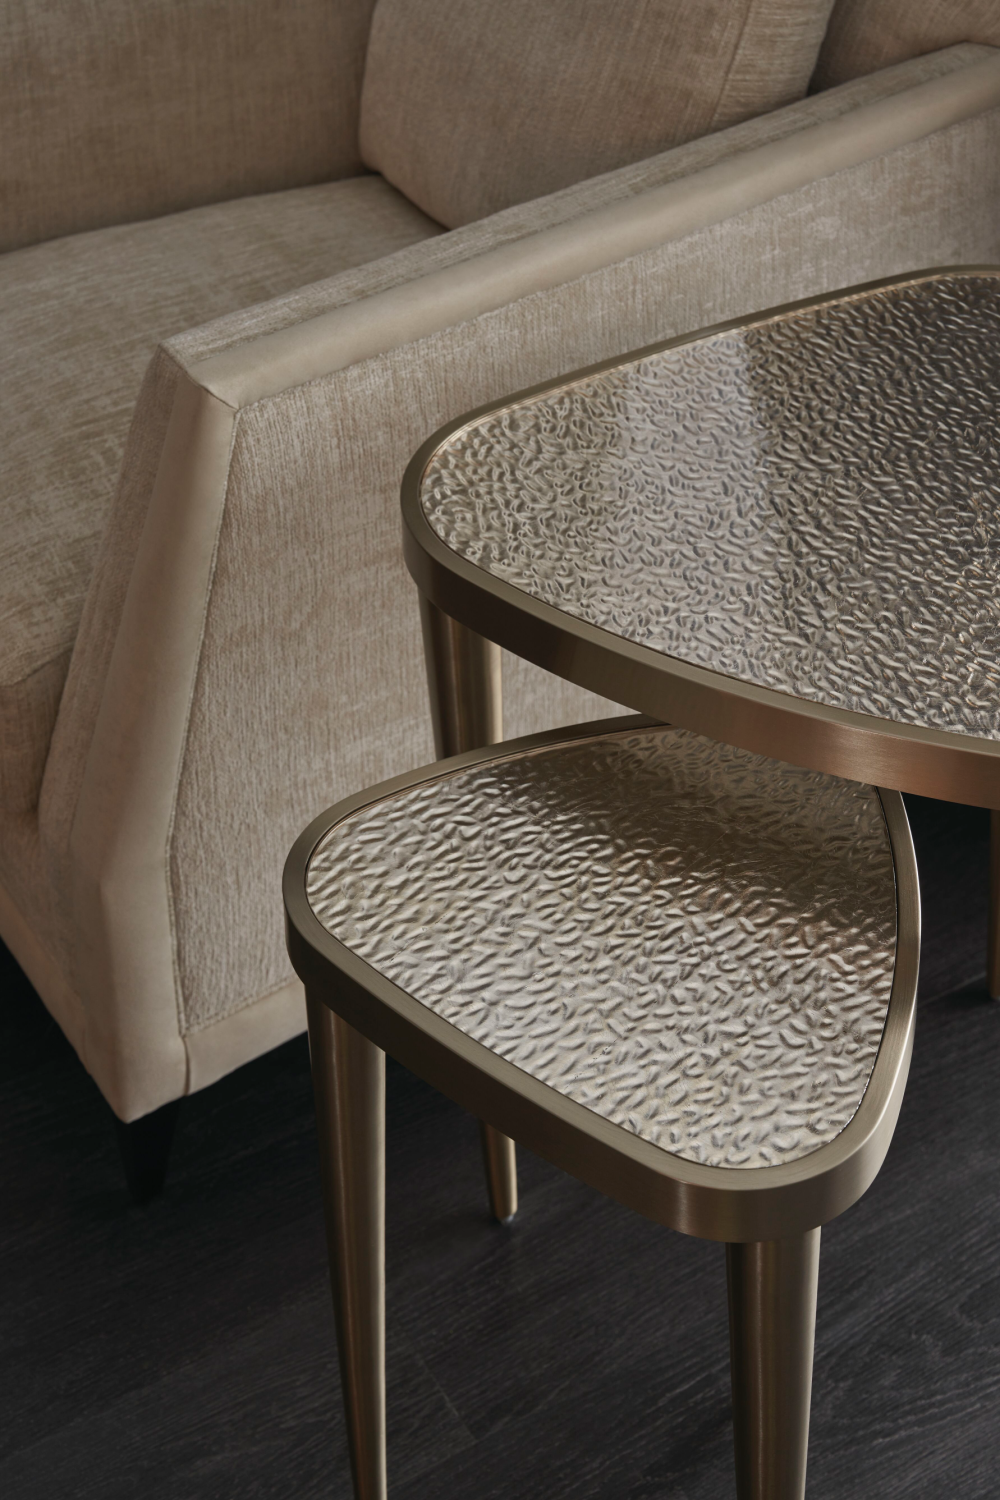 Beige Chenille Lounge Chair | Caracole Limitless | Oroa.com